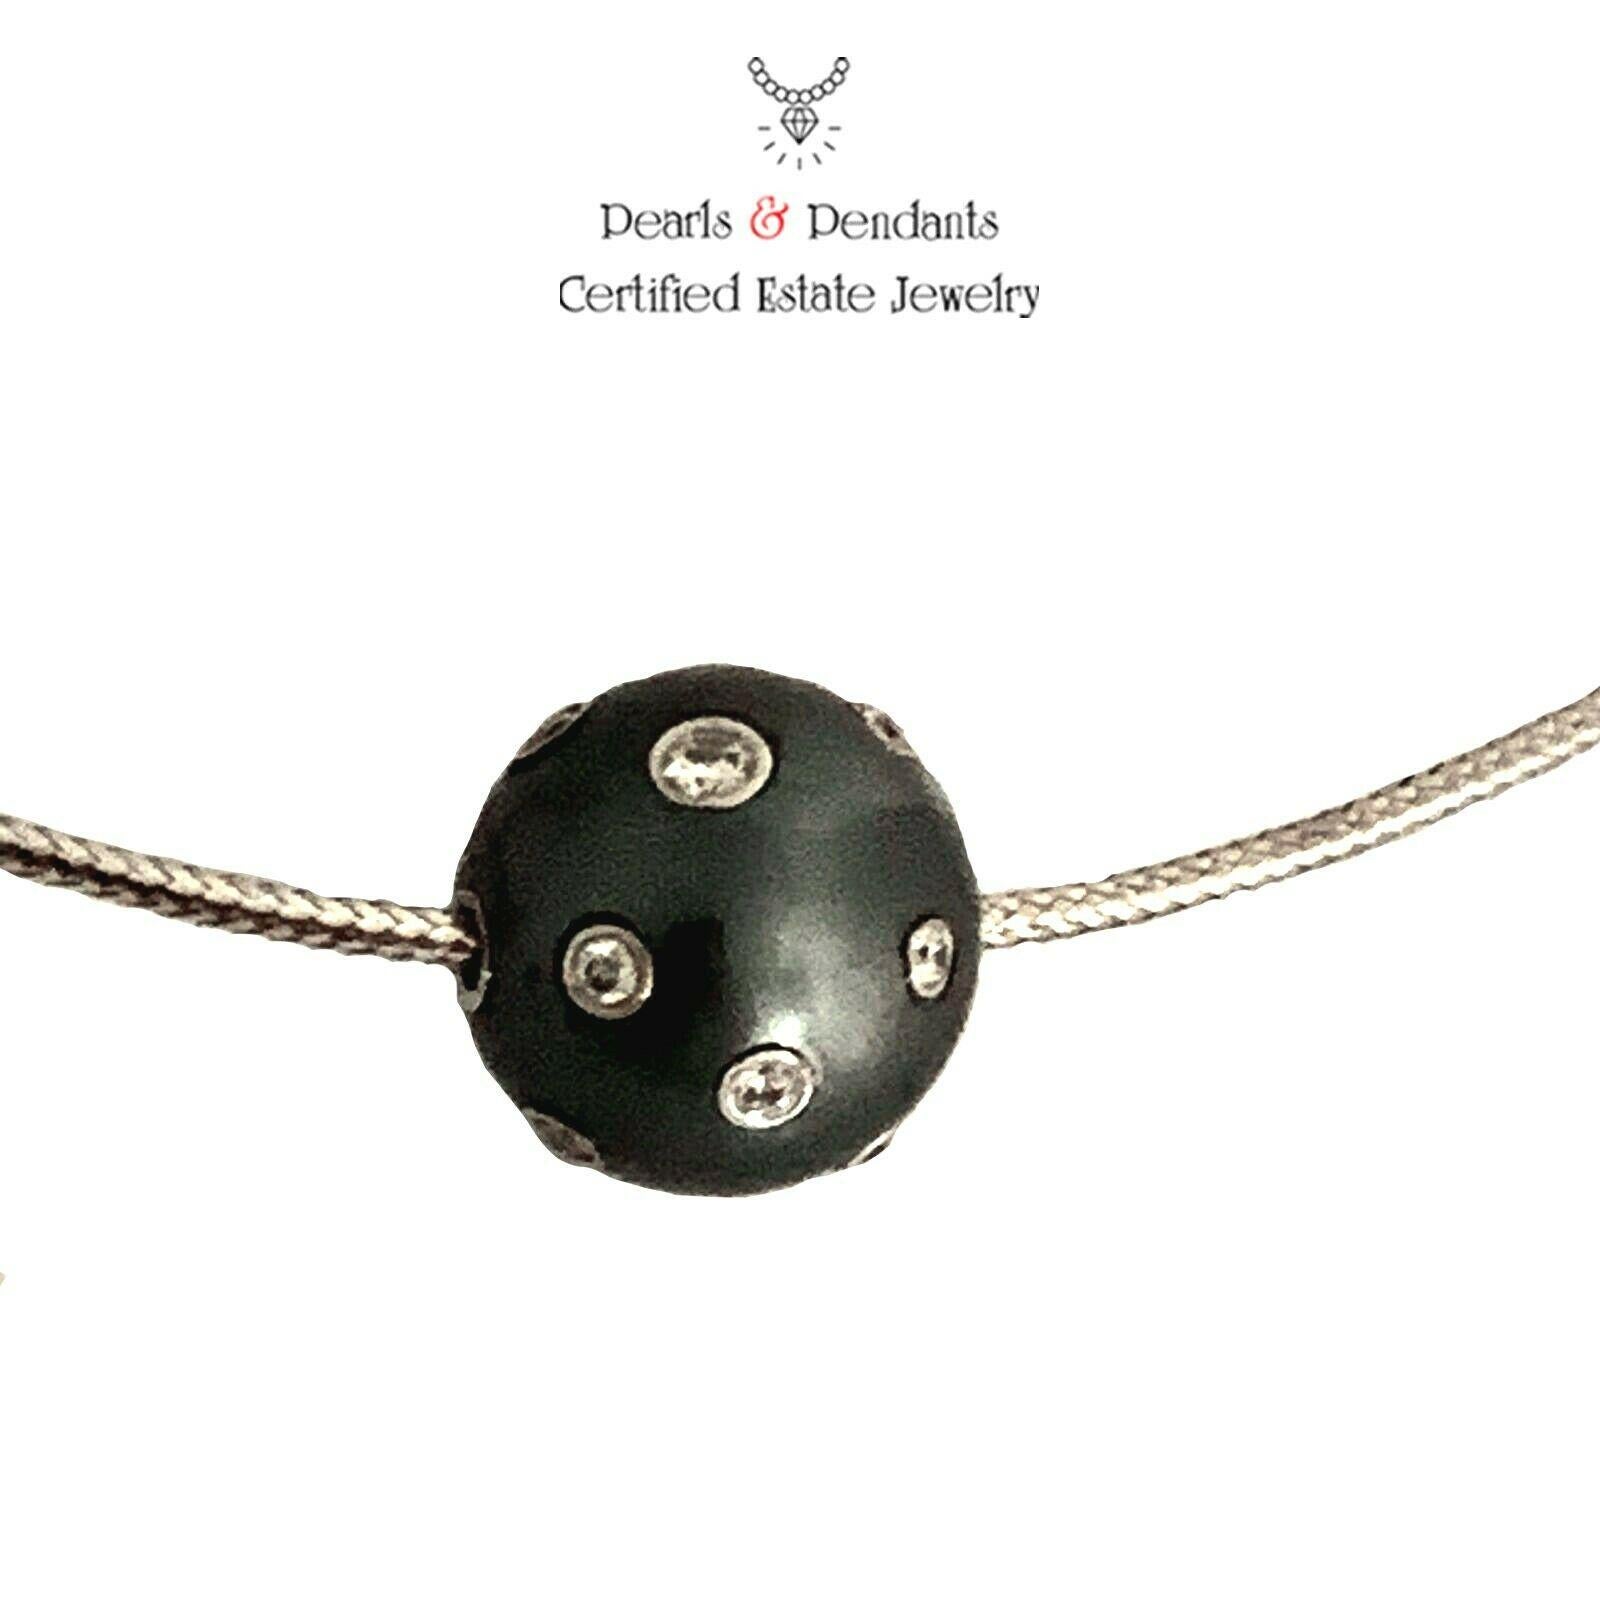 Fine Quality Tahitian South Sea Pearl Diamond Necklace 14k Gold Italy Certified $3950 920458

This is a Unique Custom Made Glamorous Piece of Jewelry!

Nothing says, “I Love you” more than Diamonds and Pearls!

This Tahitian pearl necklace has been